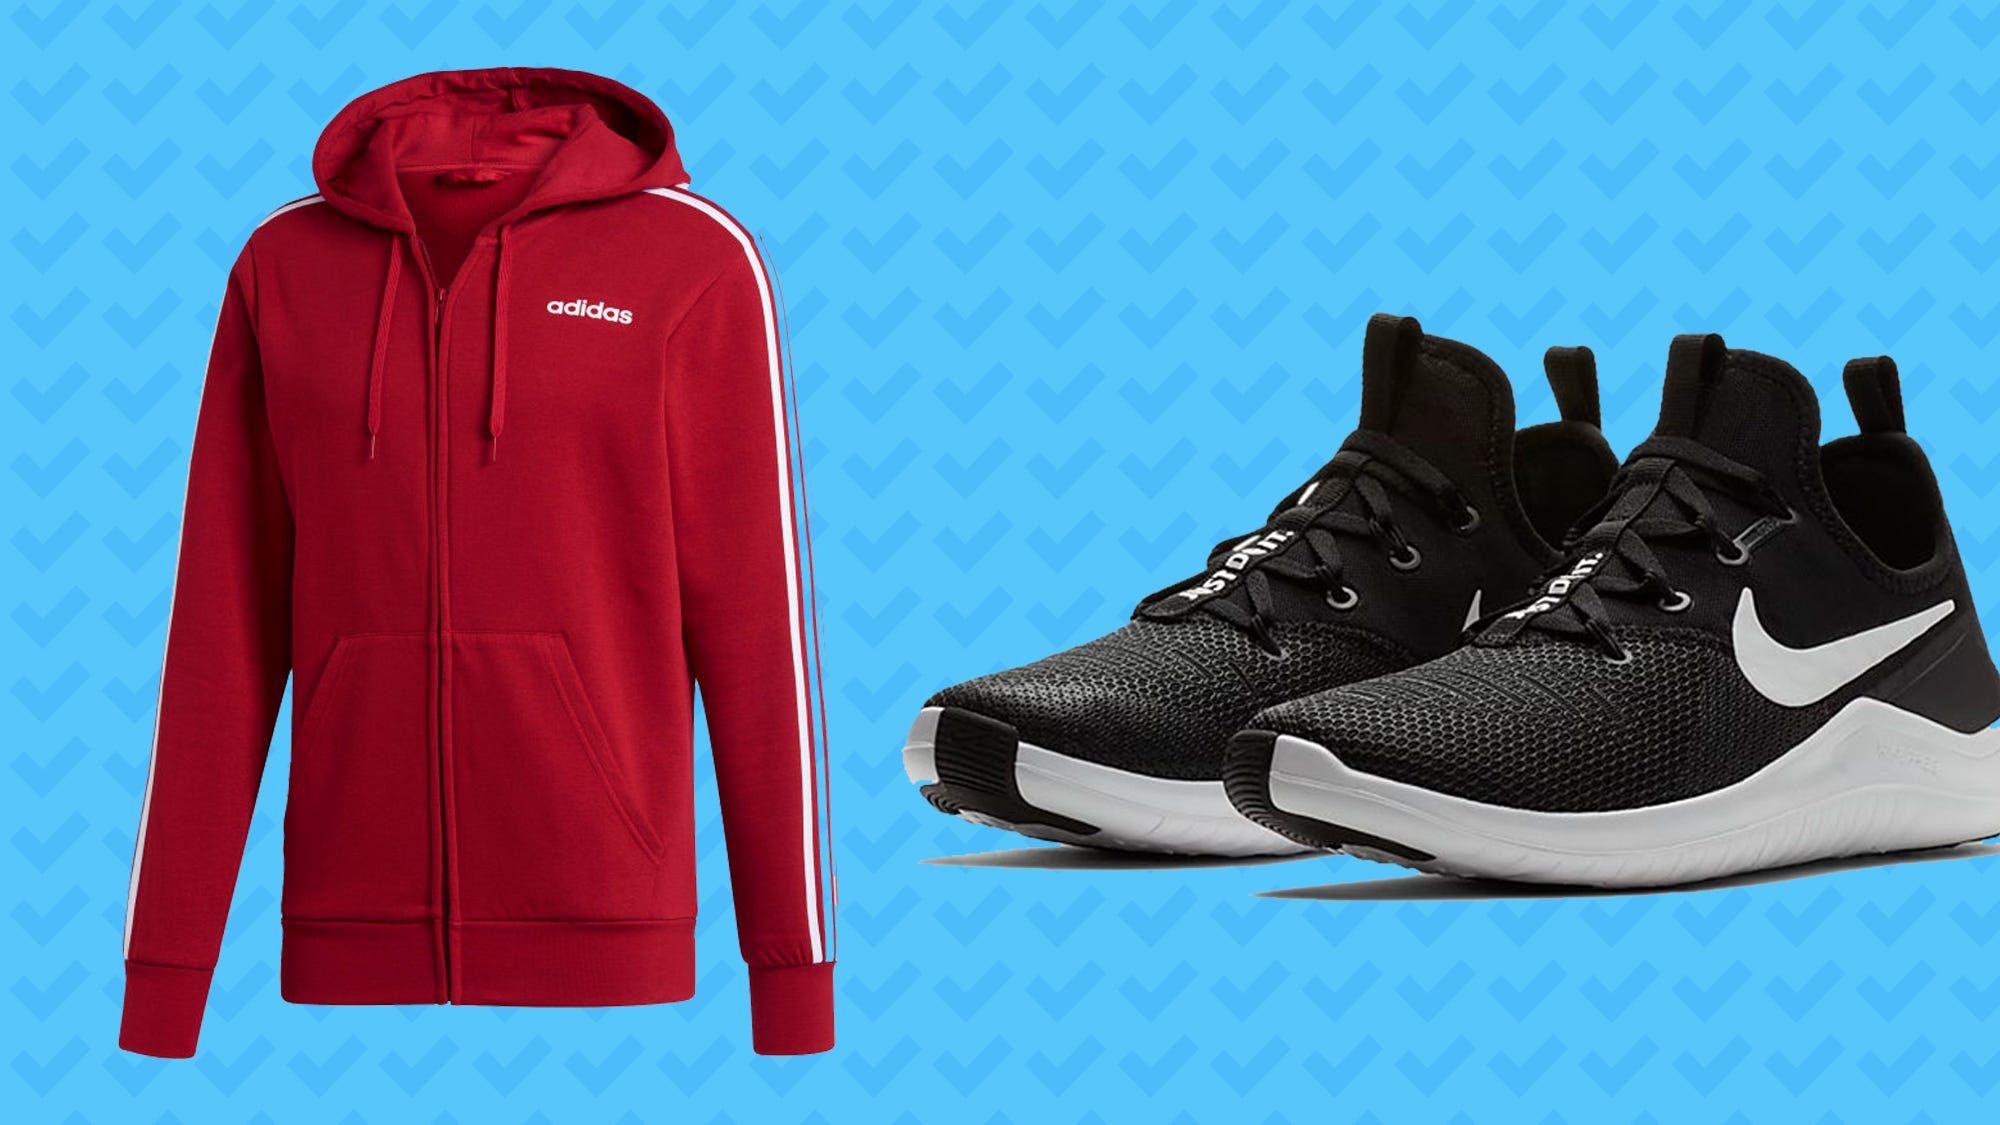 The best Nike and Adidas deals